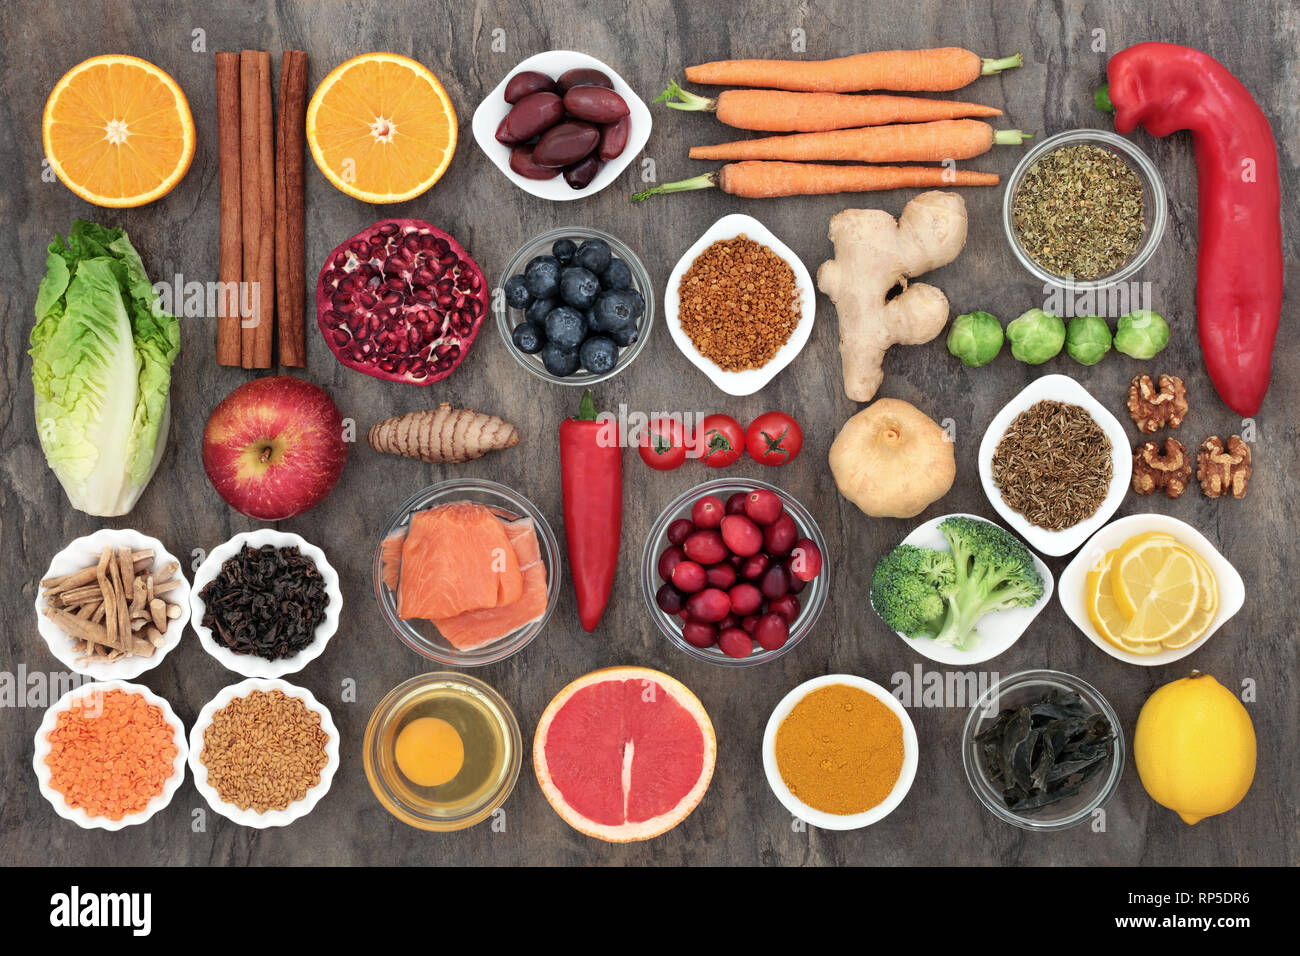 Healthy food to slow the ageing process concept including fruit, vegetables, fish, seeds, nuts, herbs, spices and pollen grain. Stock Photo